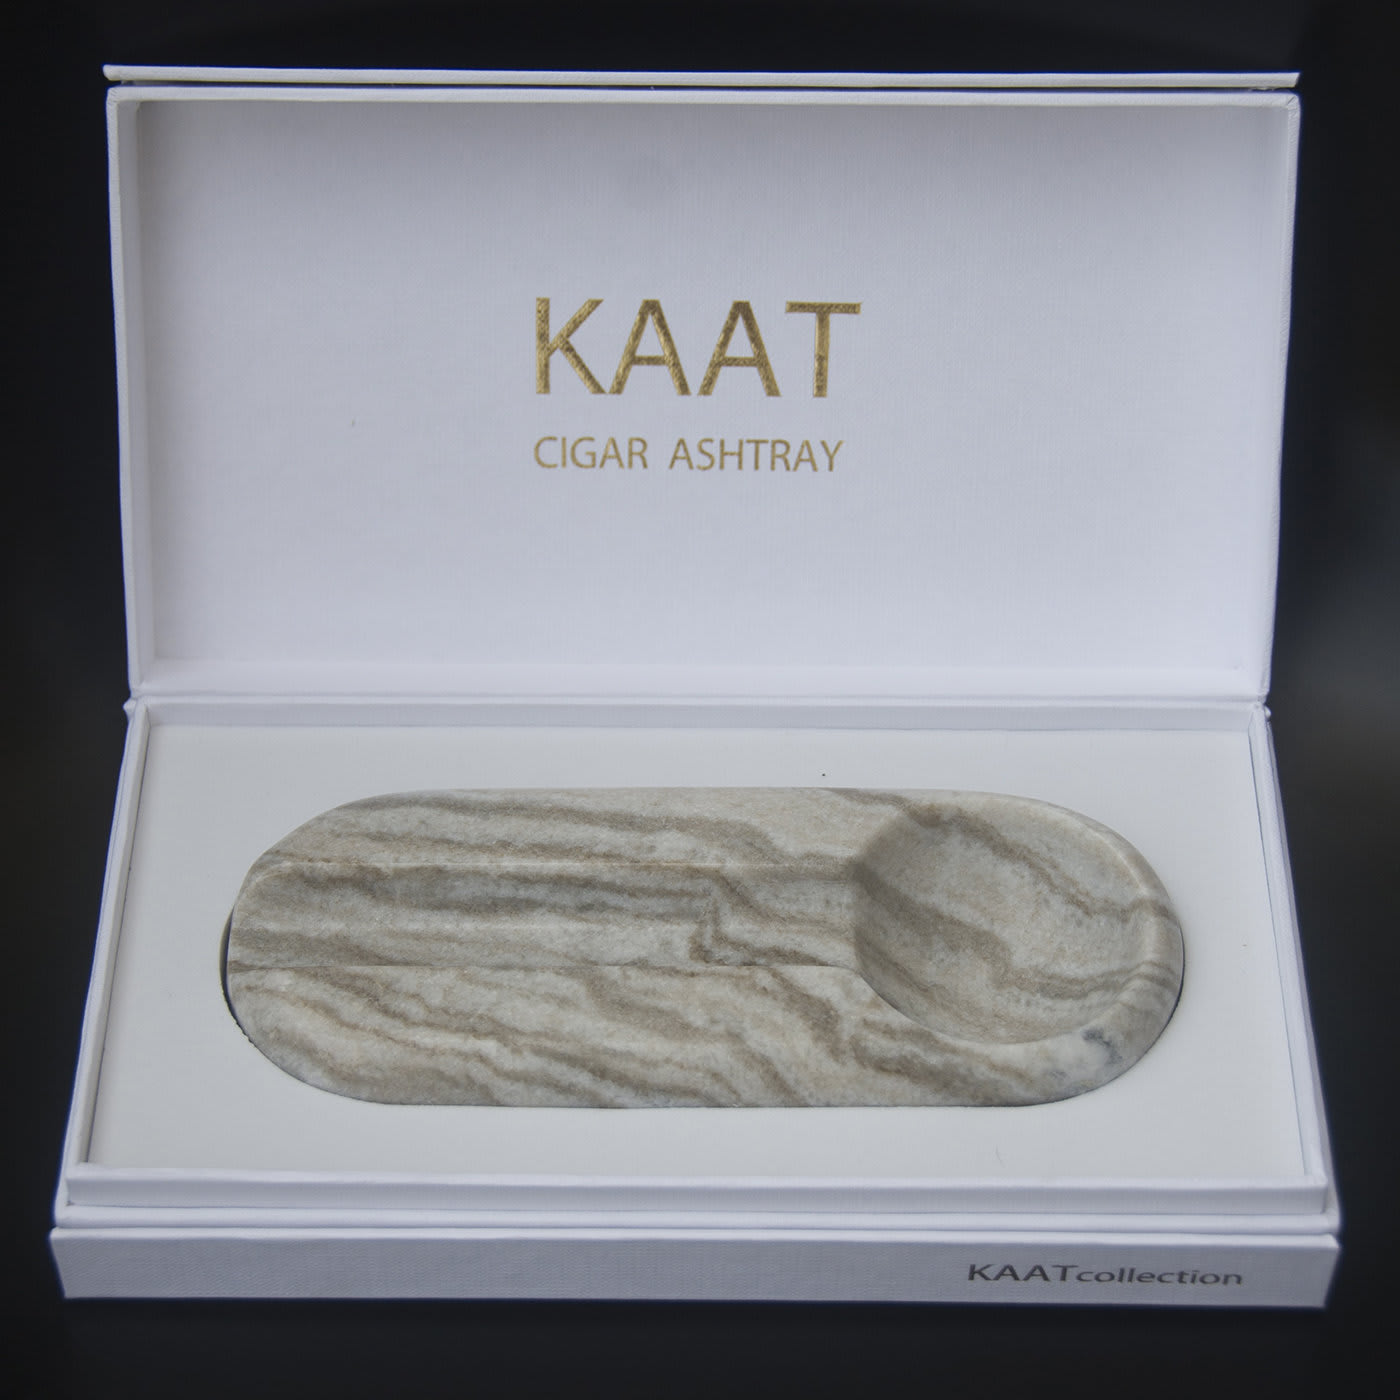 Namibia Cigar Ashtray with Box - Kaat by Michele Cucchiara and Philippos Zannettos